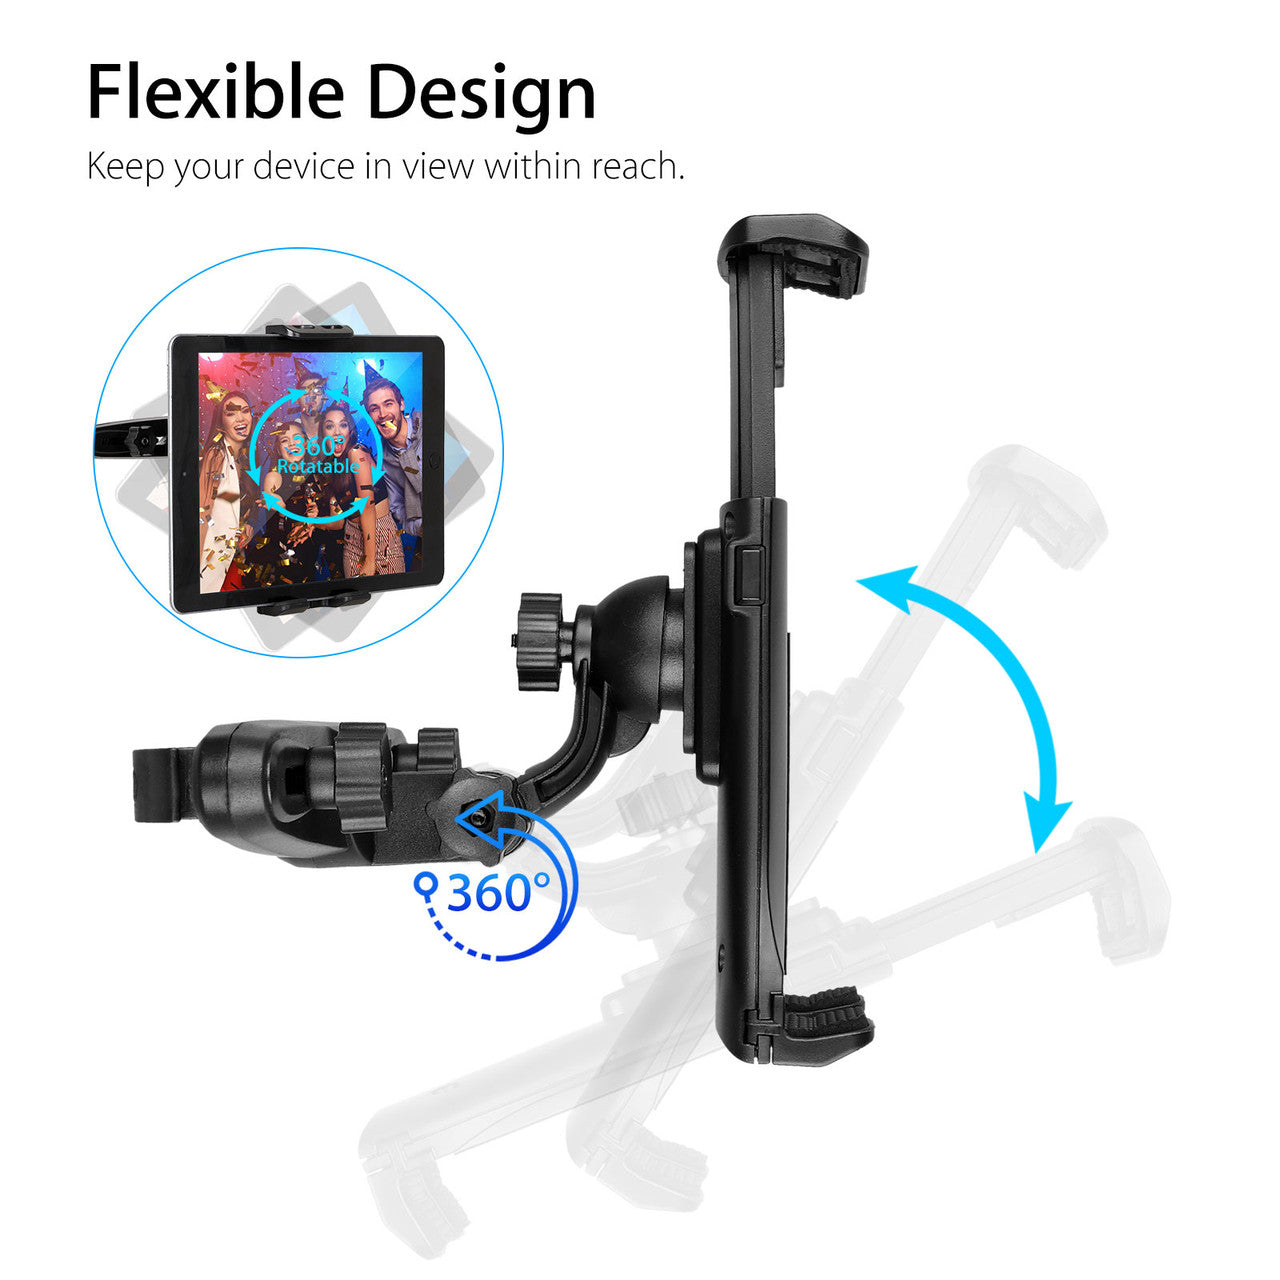 360°Multi-Angle Rotation Car Backseat Seat Holder Sedan Headrest Stand Compatible with iPhone iPad Galaxy Tab Nintendo & 4"- 10" Smartphones and Tablet